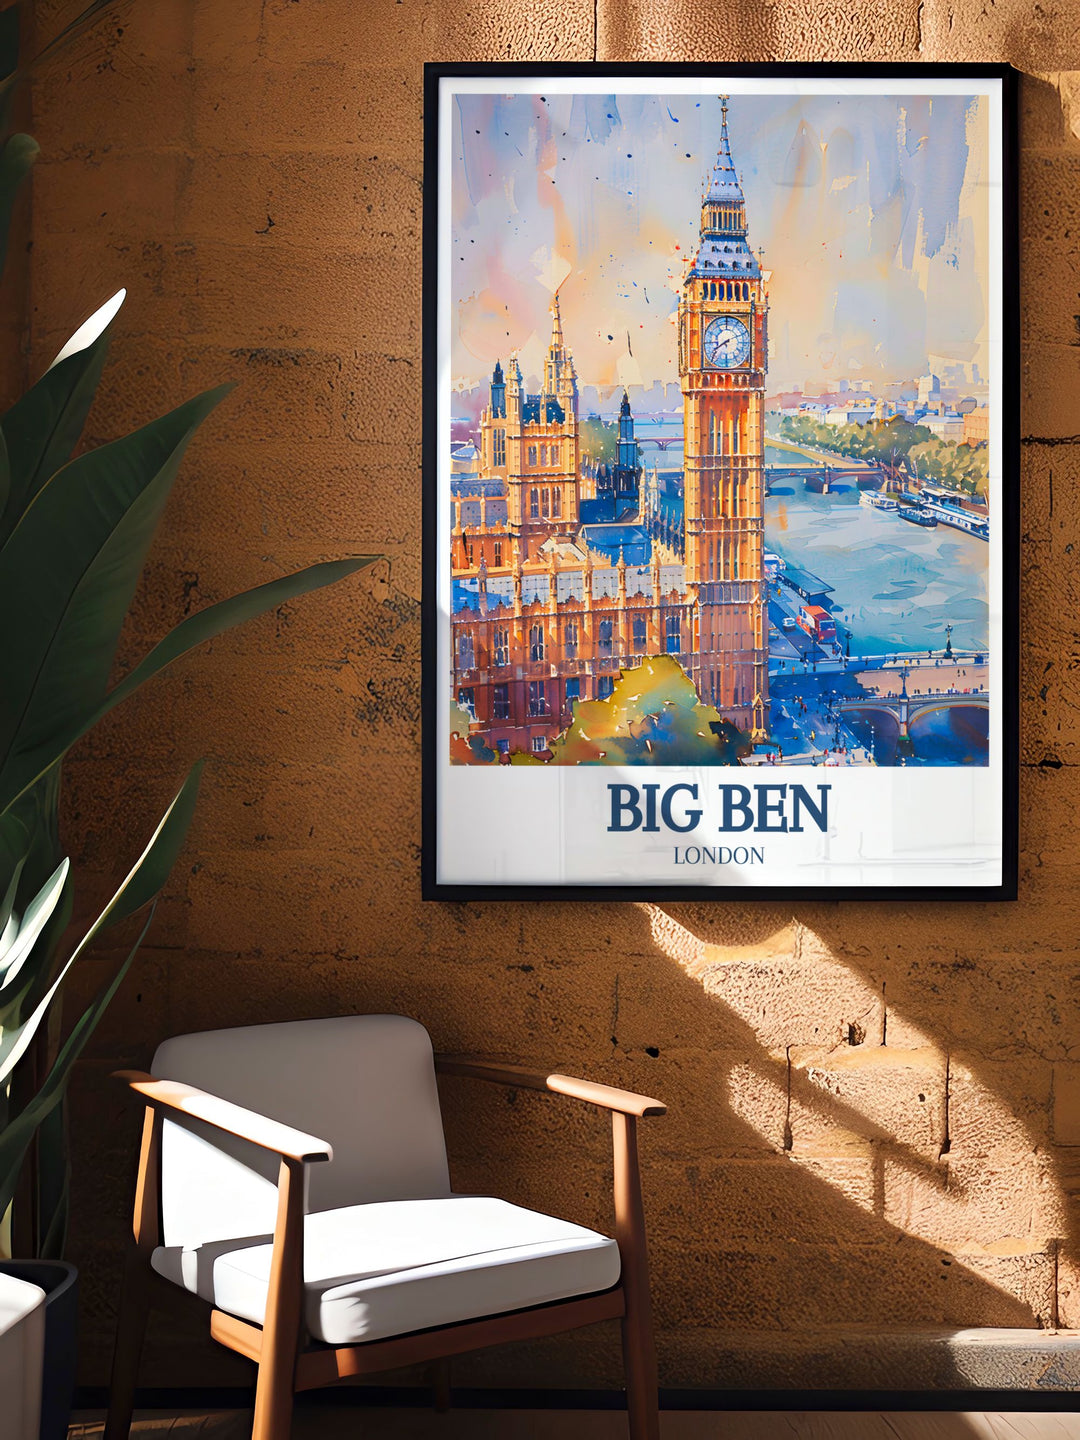 Detailed digital download of Londons Big Ben, the Houses of Parliament, and the River Thames, ideal for any art collection or as a memorable travel keepsake. Enhances your home with Londons historic charm.